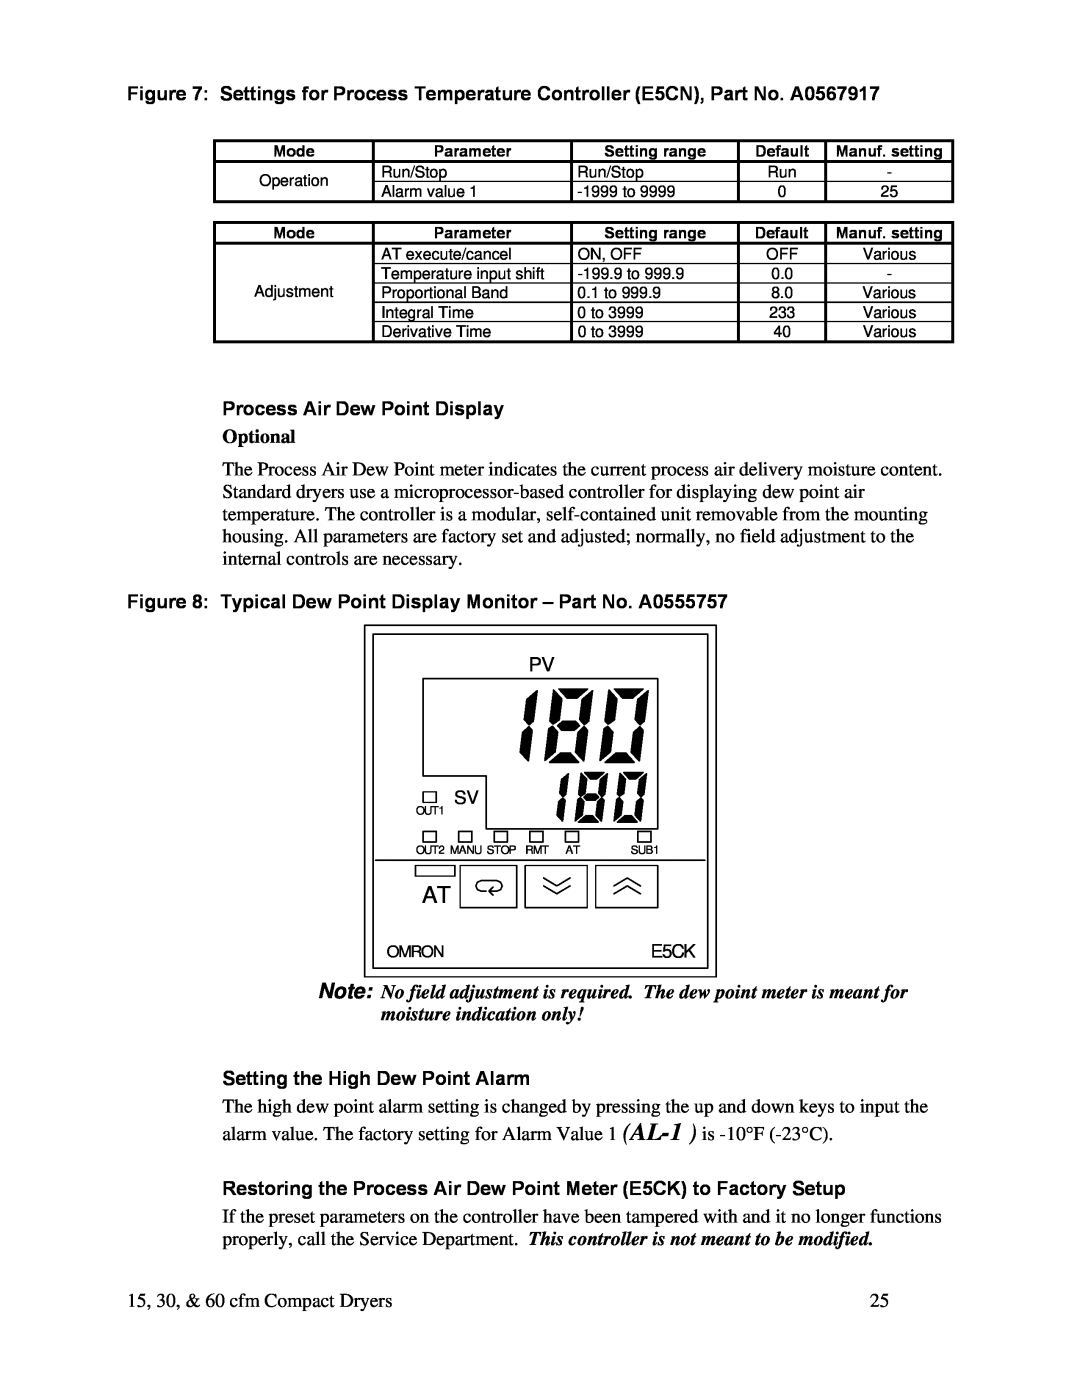 Sterling 60 cfm, 30 cfm Process Air Dew Point Display, Optional, Typical Dew Point Display Monitor - Part No. A0555757 